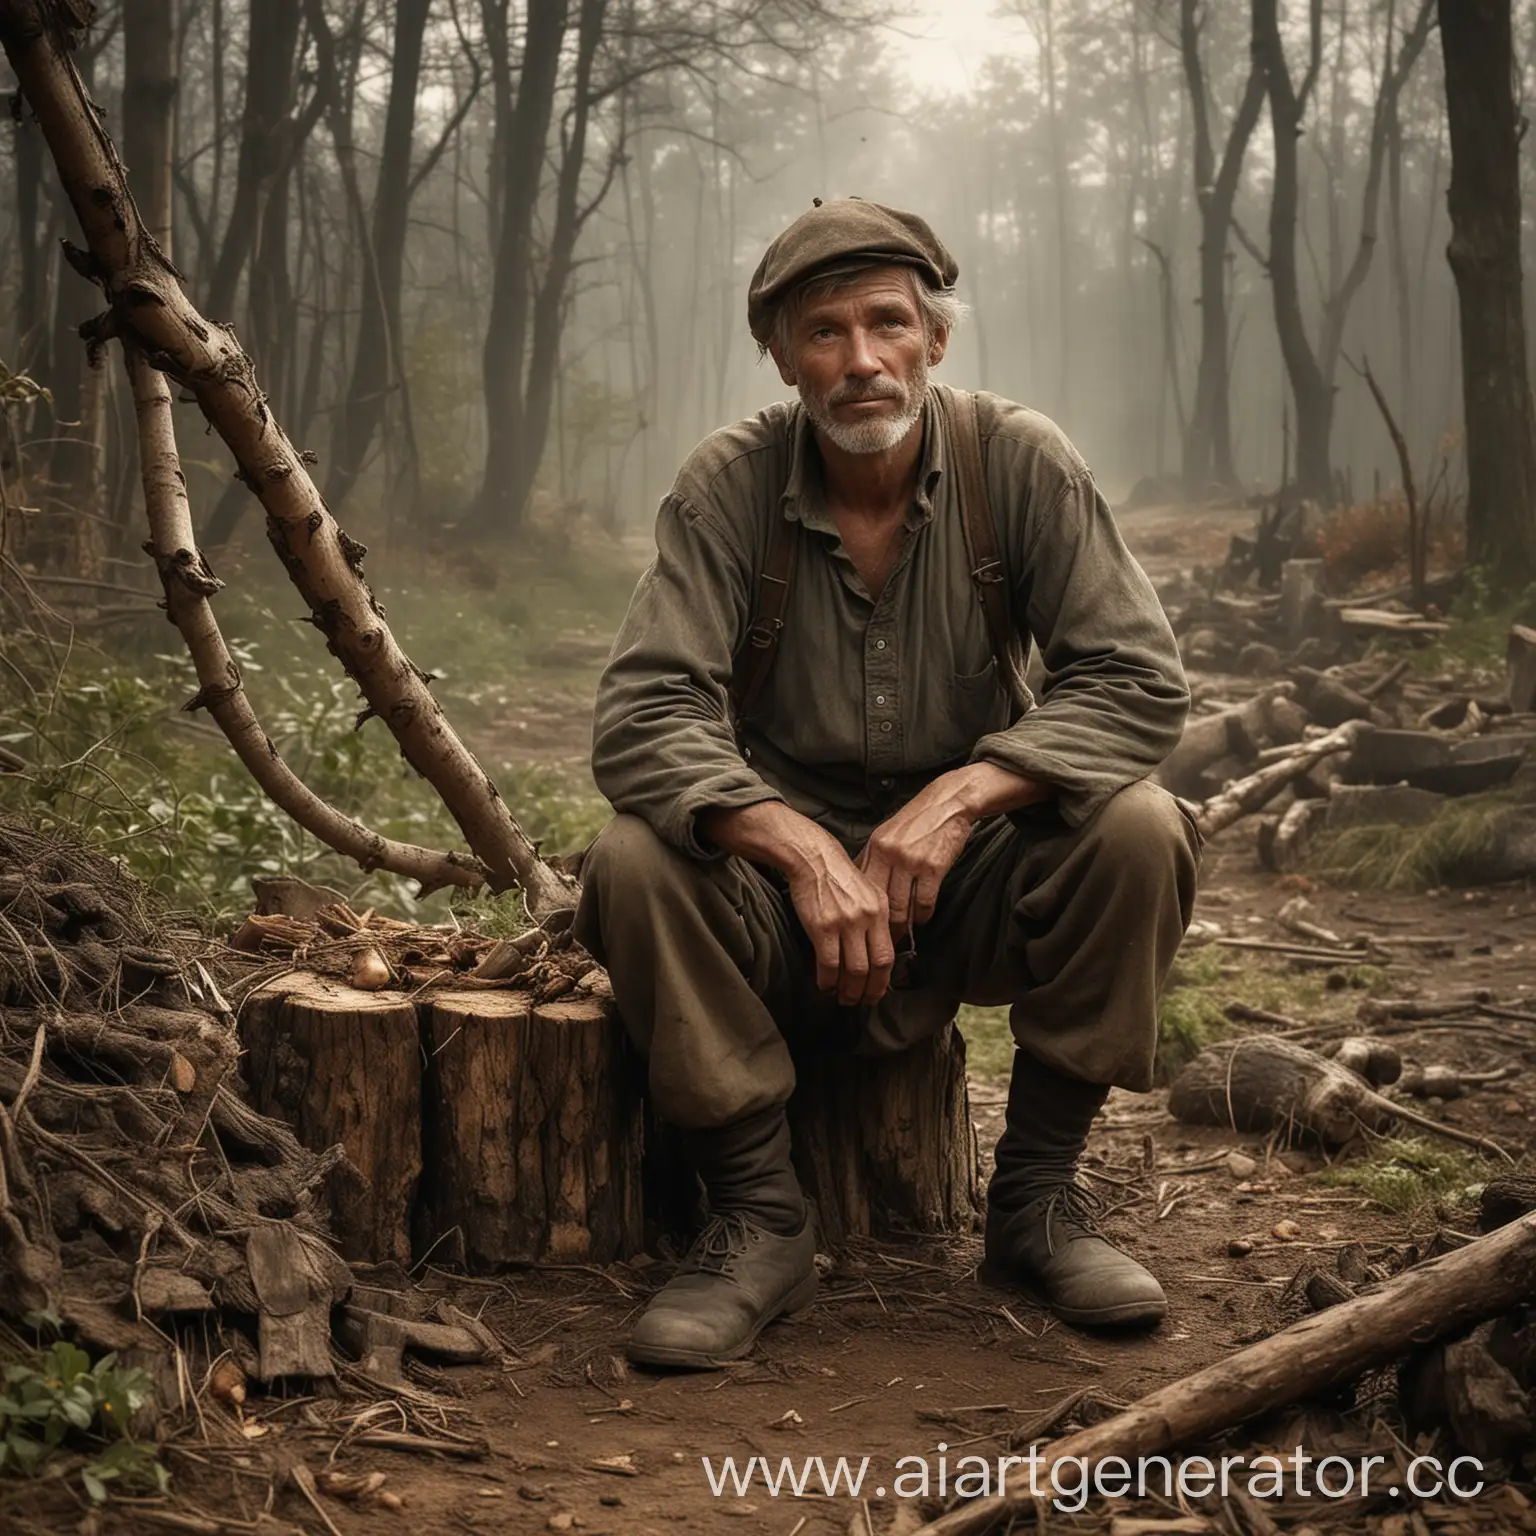 Once upon a time, in a small village, there lived a poor woodcutter. He worked hard every day to provide for his family, but no matter how much he toiled, they always struggled to make ends meet